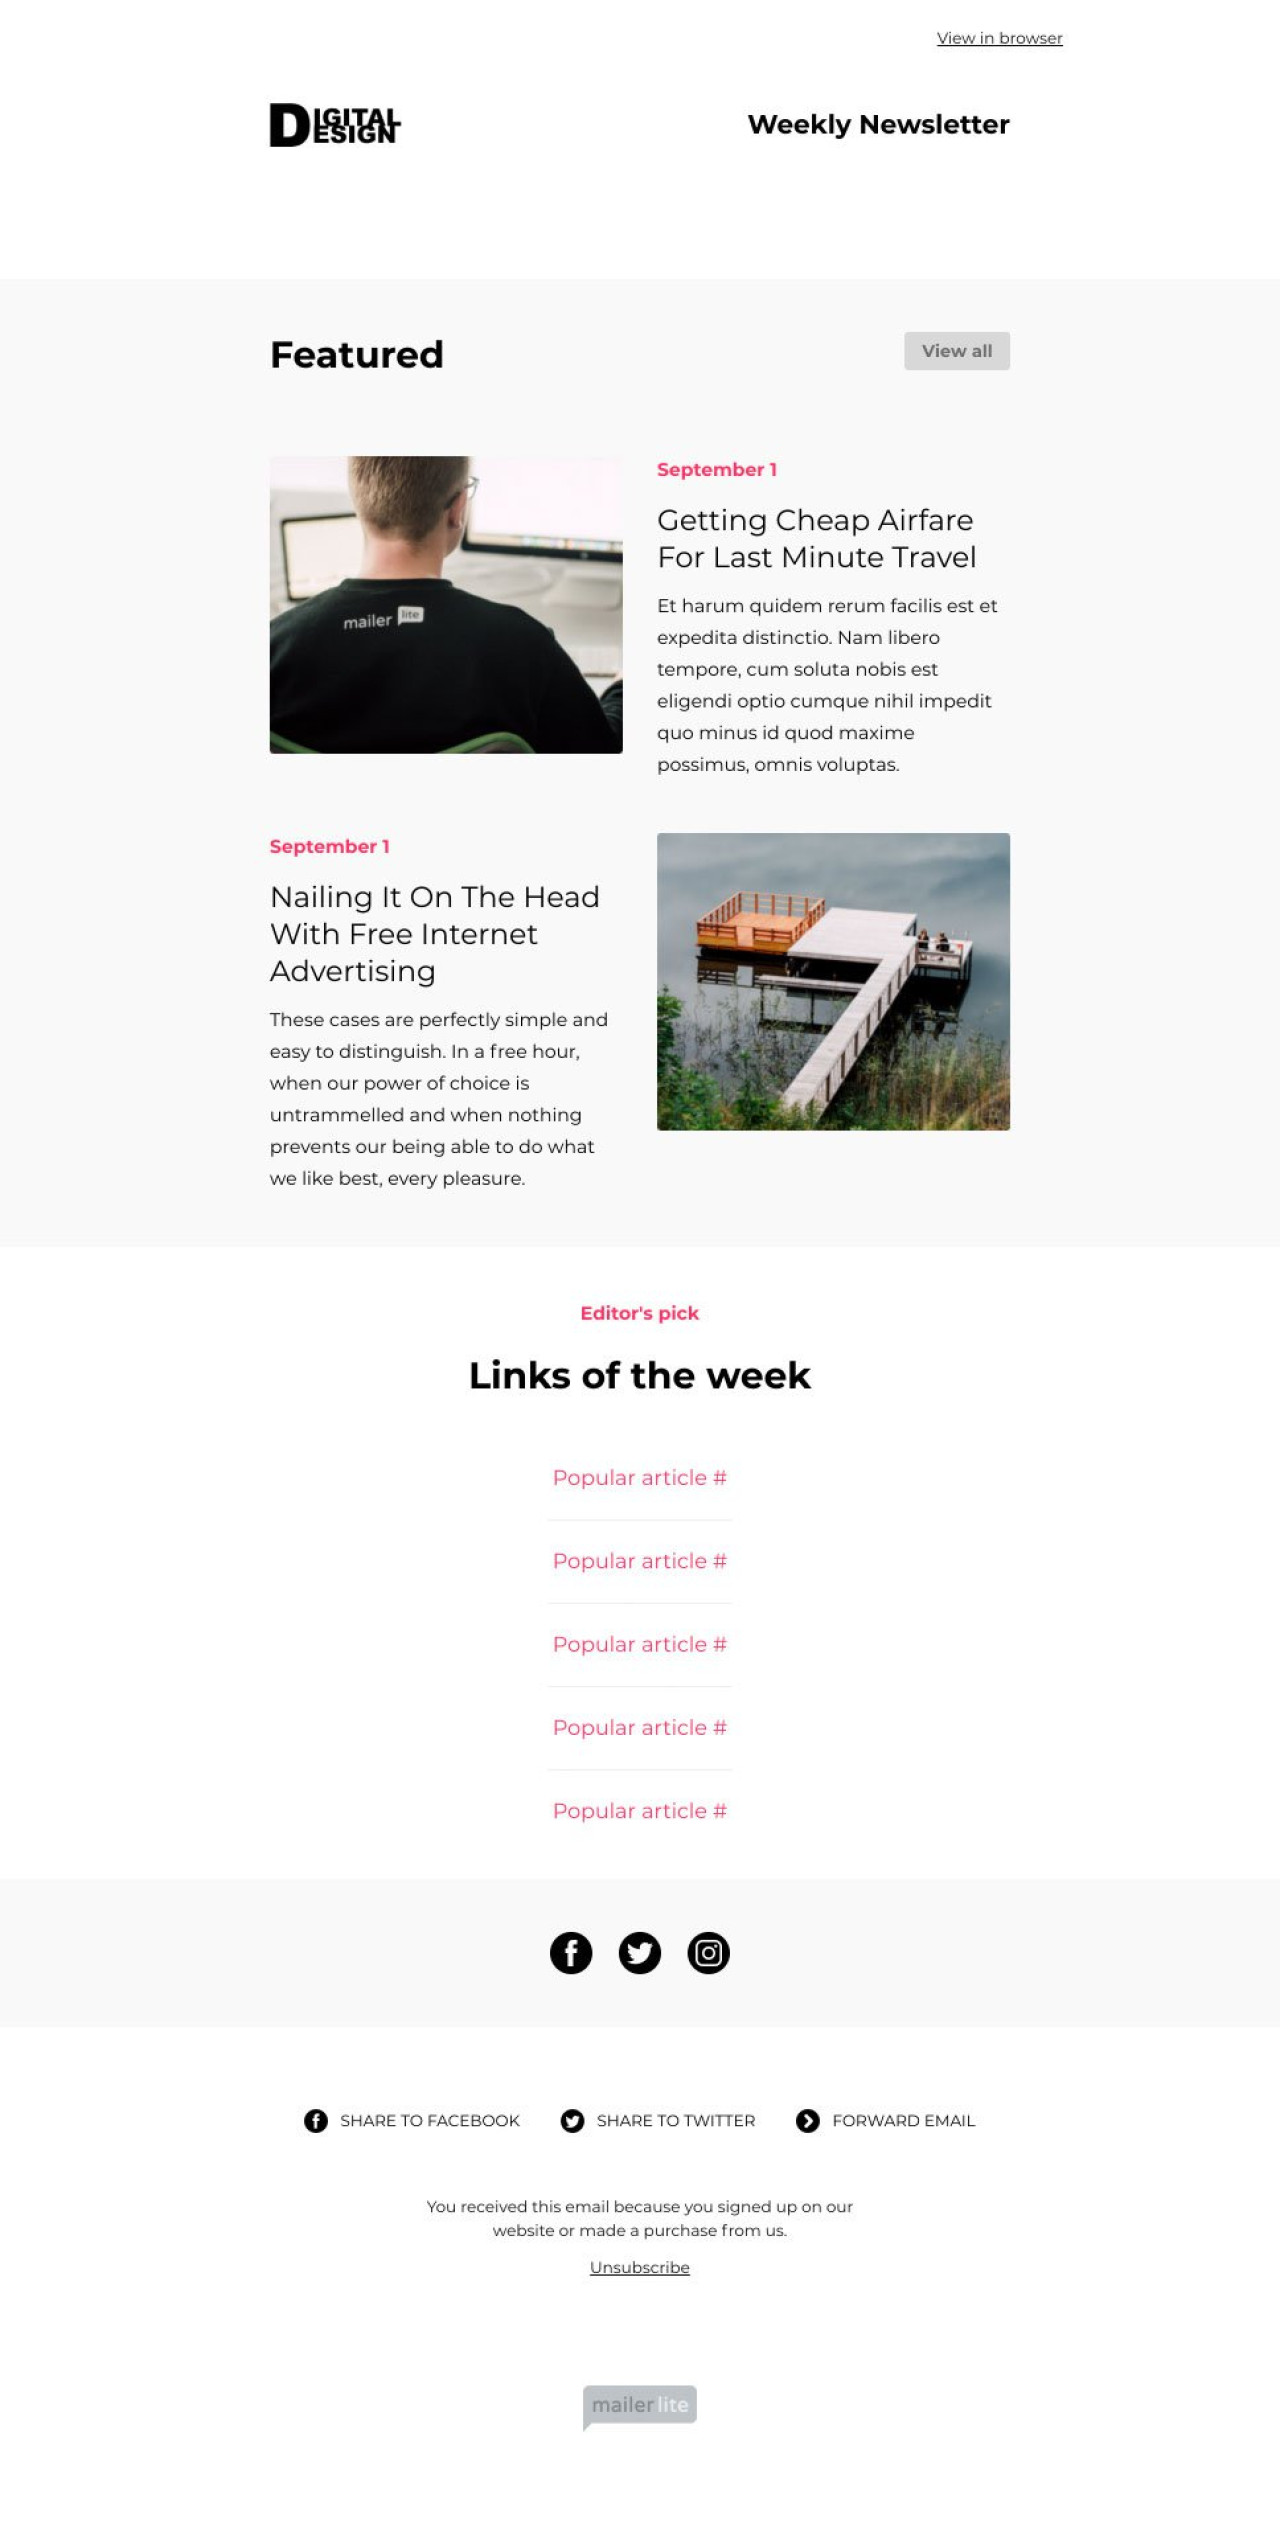 Weekly News example - Made with MailerLite